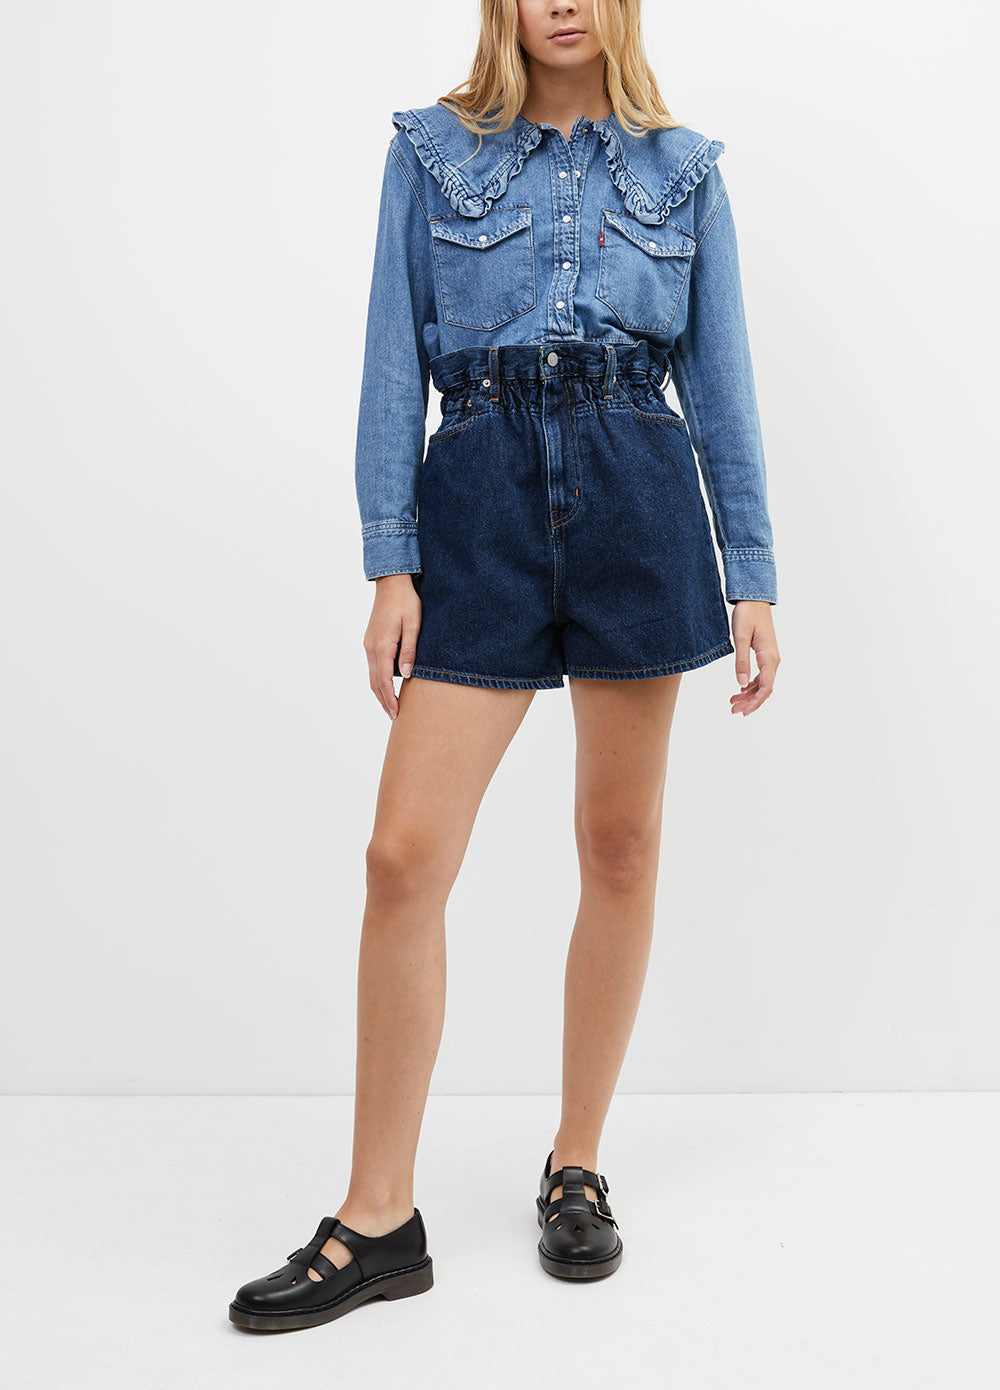 x Levis® Cinched Shorts